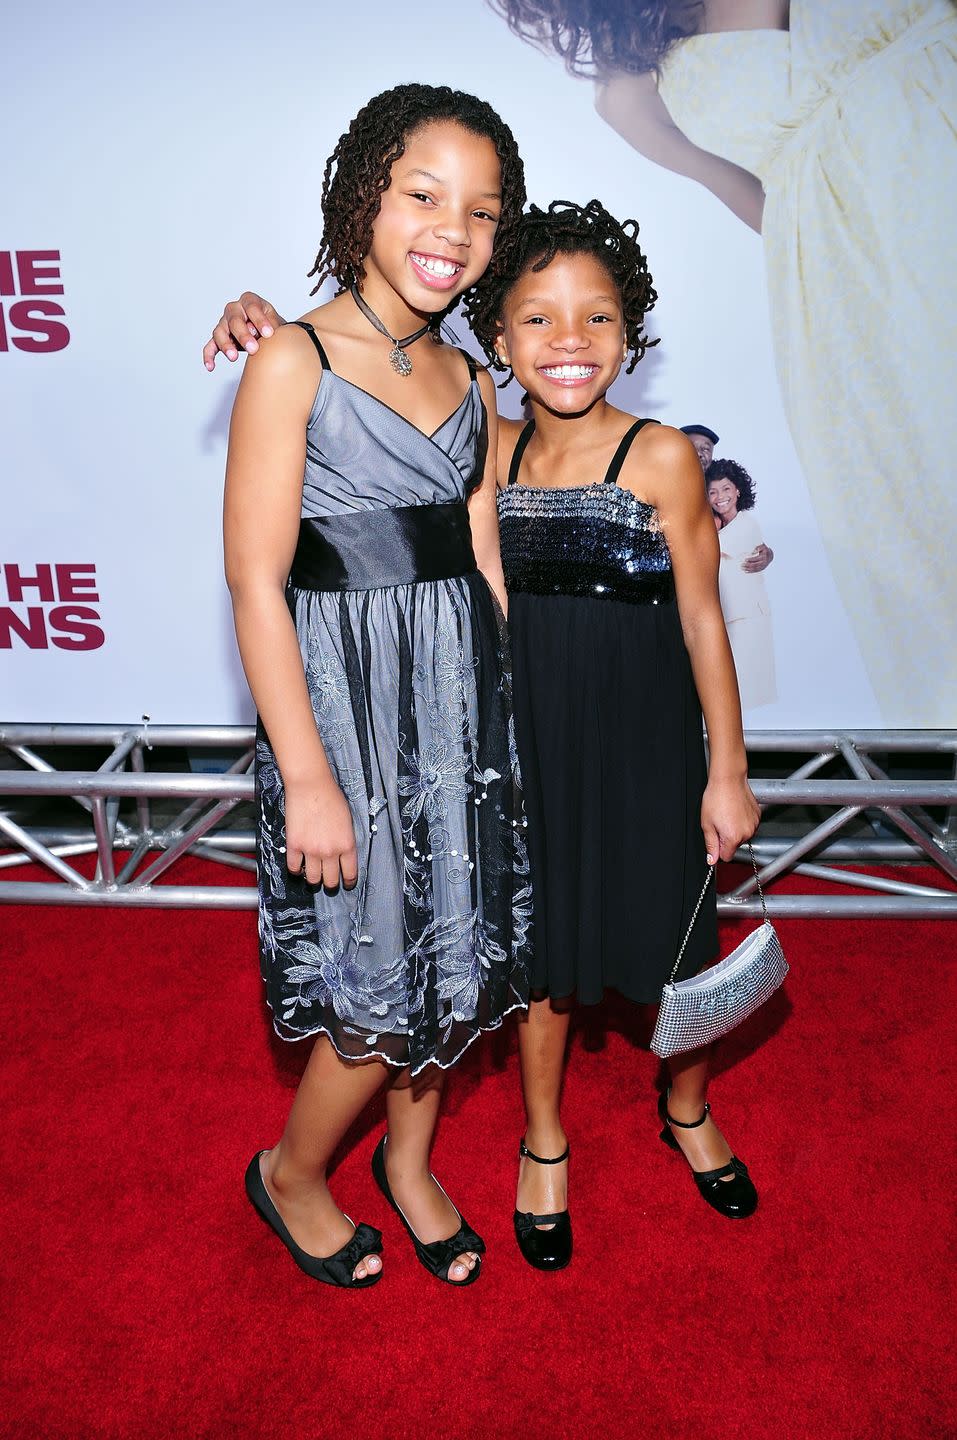 chloe bailey and halle bailey smile at the camera while standing on a red carpet, the young girls wear sleeveless formal dresses and black shoes, halle holds a purse